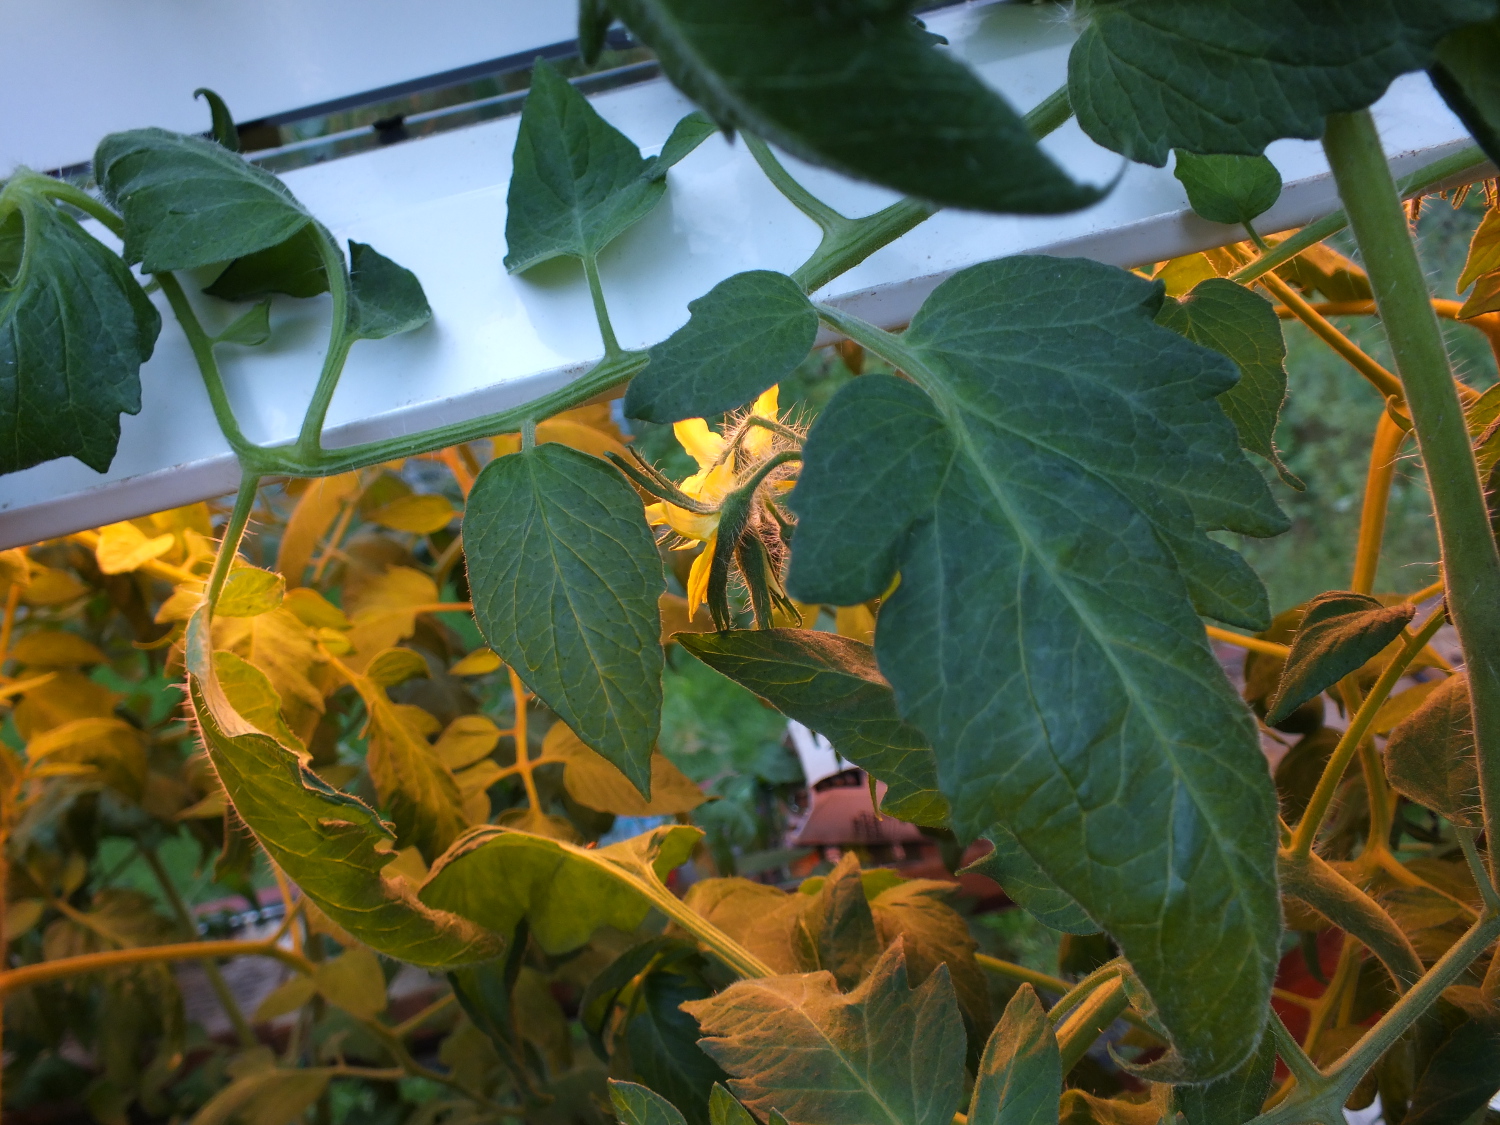 Flowers are just starting to blossom on these tomato plants in a North Douglas greenhouse. But even with grow lights, it's unlikely these plants will provide much fruit before the end of the season. Some of the branches and leaves also need to be thinned out to allow for more sunlight. (Photo by Matt Miller/KTOO)